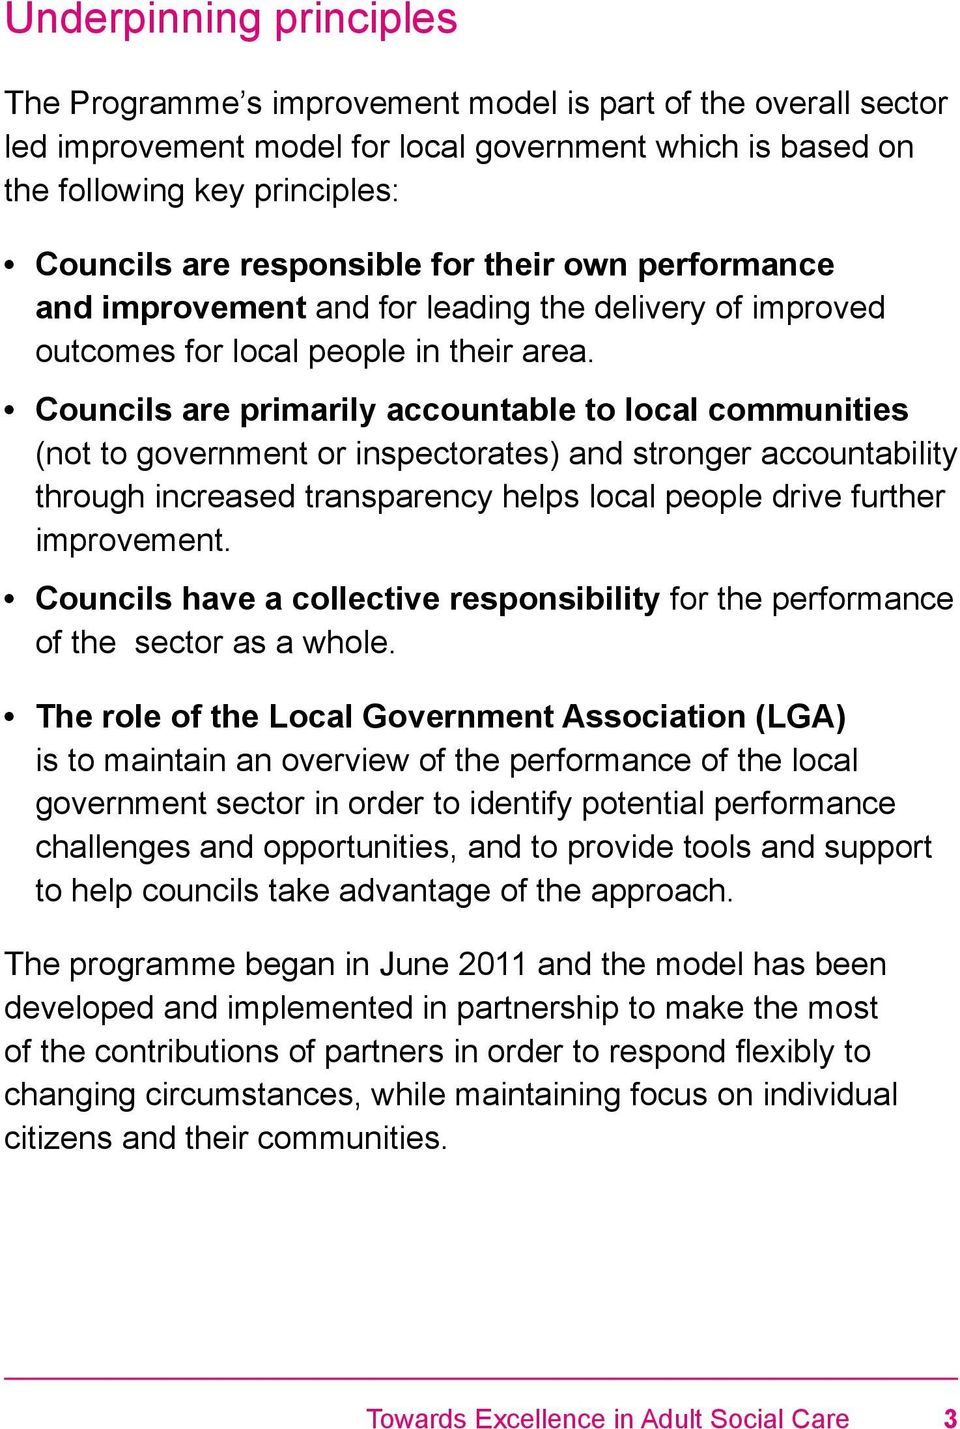 Councils are primarily accountable to local communities (not to government or inspectorates) and stronger accountability through increased transparency helps local people drive further improvement.